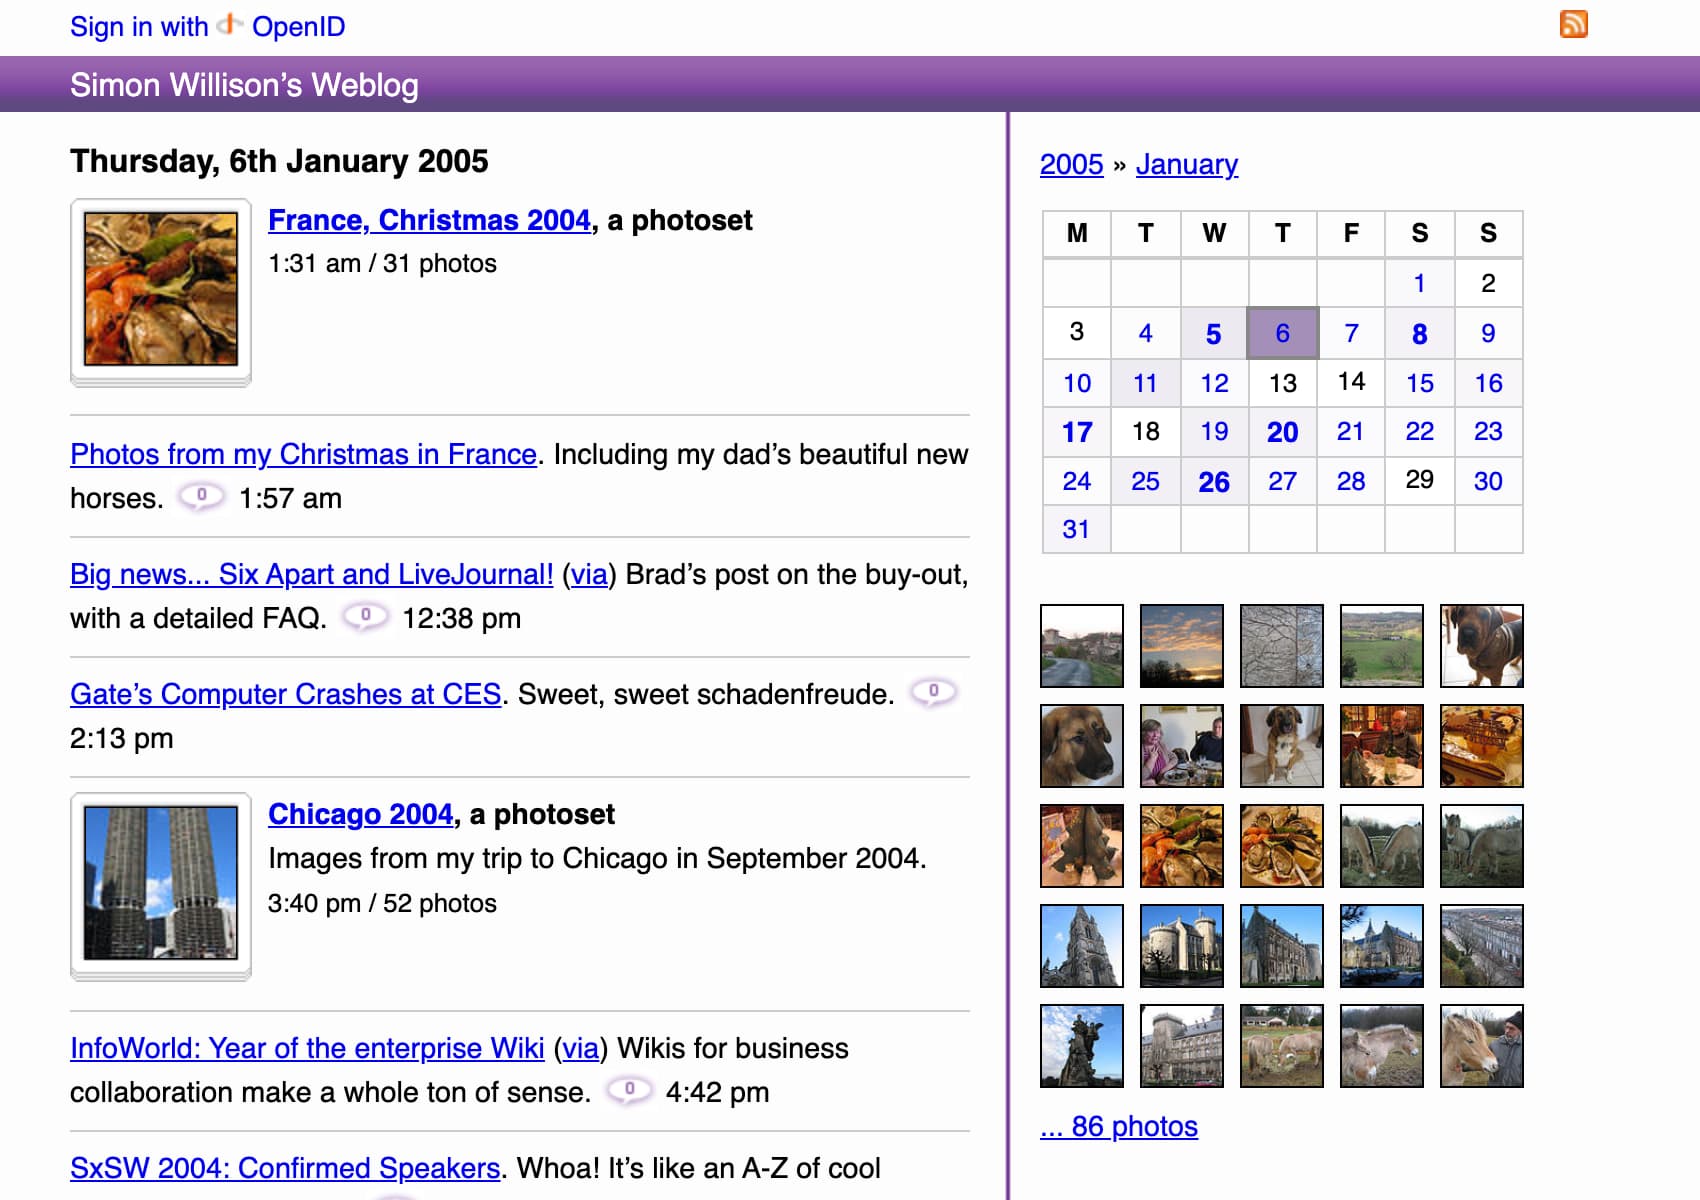 Screenshot of my blog's archive page for 6th January 2005 with my old design - it included photosets from Flickr mixed in among the links, as well as a set of photo thumbnails in the right hand navigation underneath the calendar widget